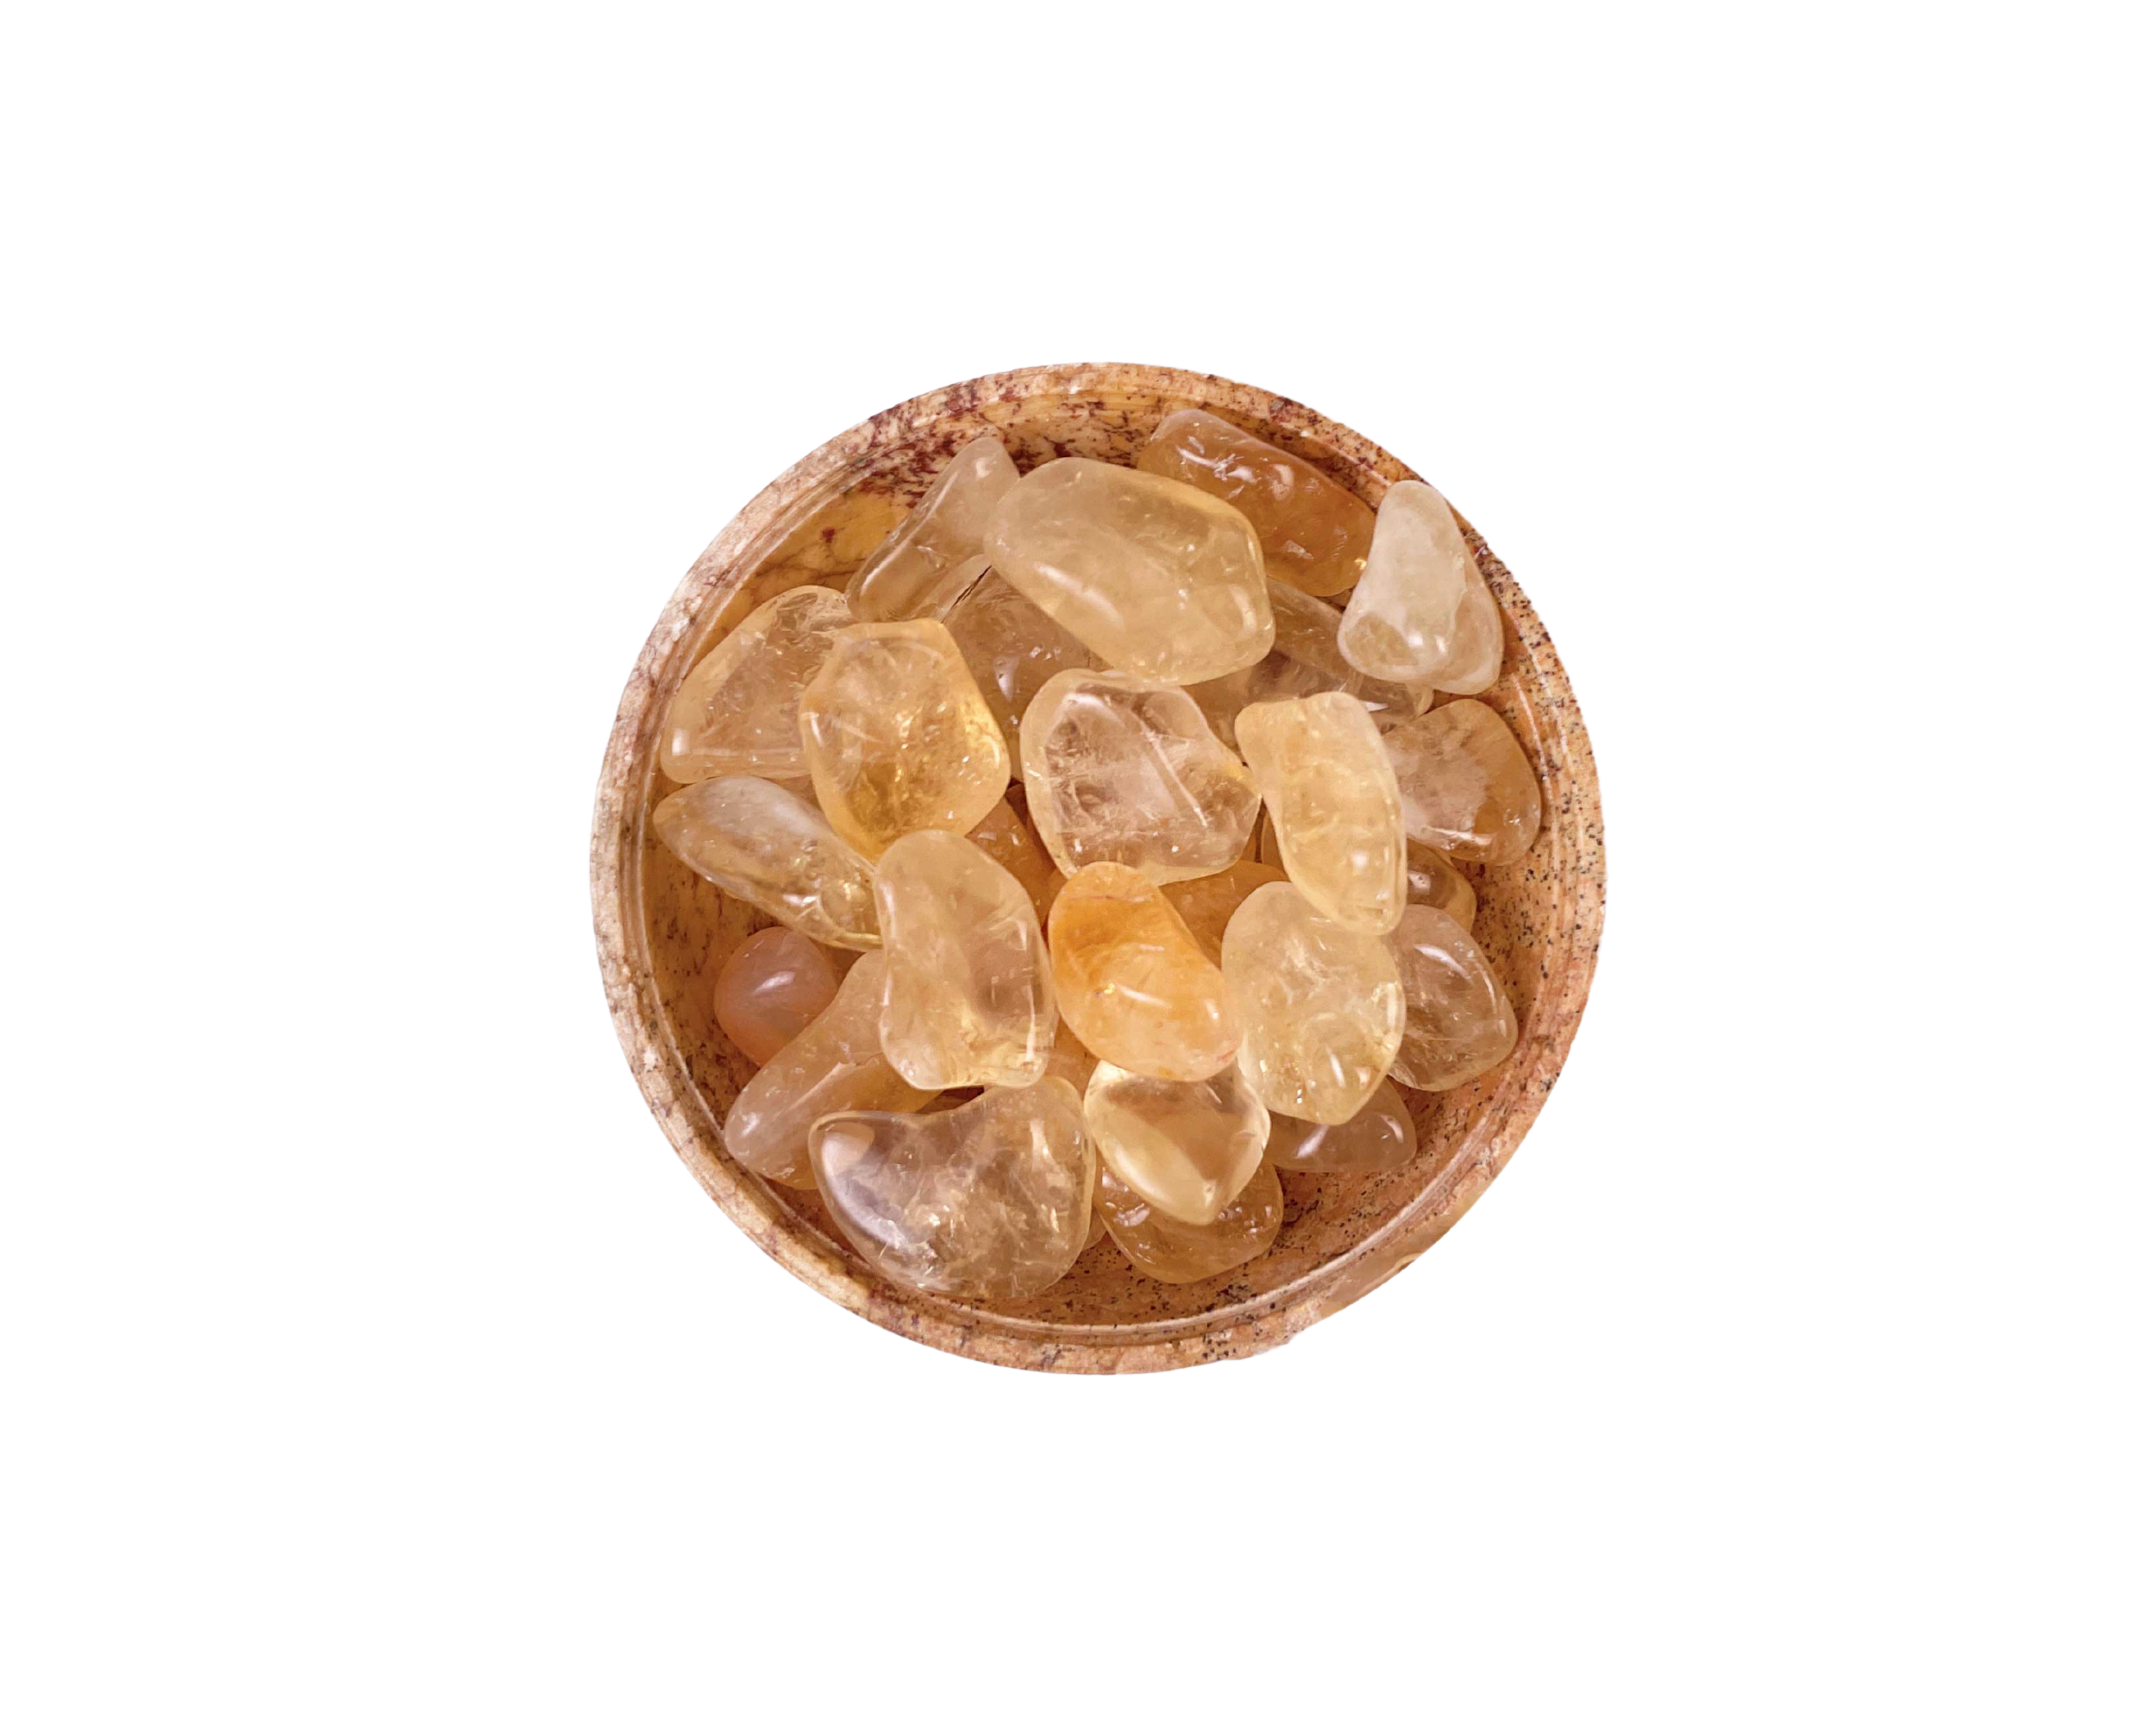 Buy Online Latest and Unique Tumbled Citrine - Happiness, Joy, Abundance, Creativity Clarity | Shop Best Spiritual Items - The Mystical Ritual